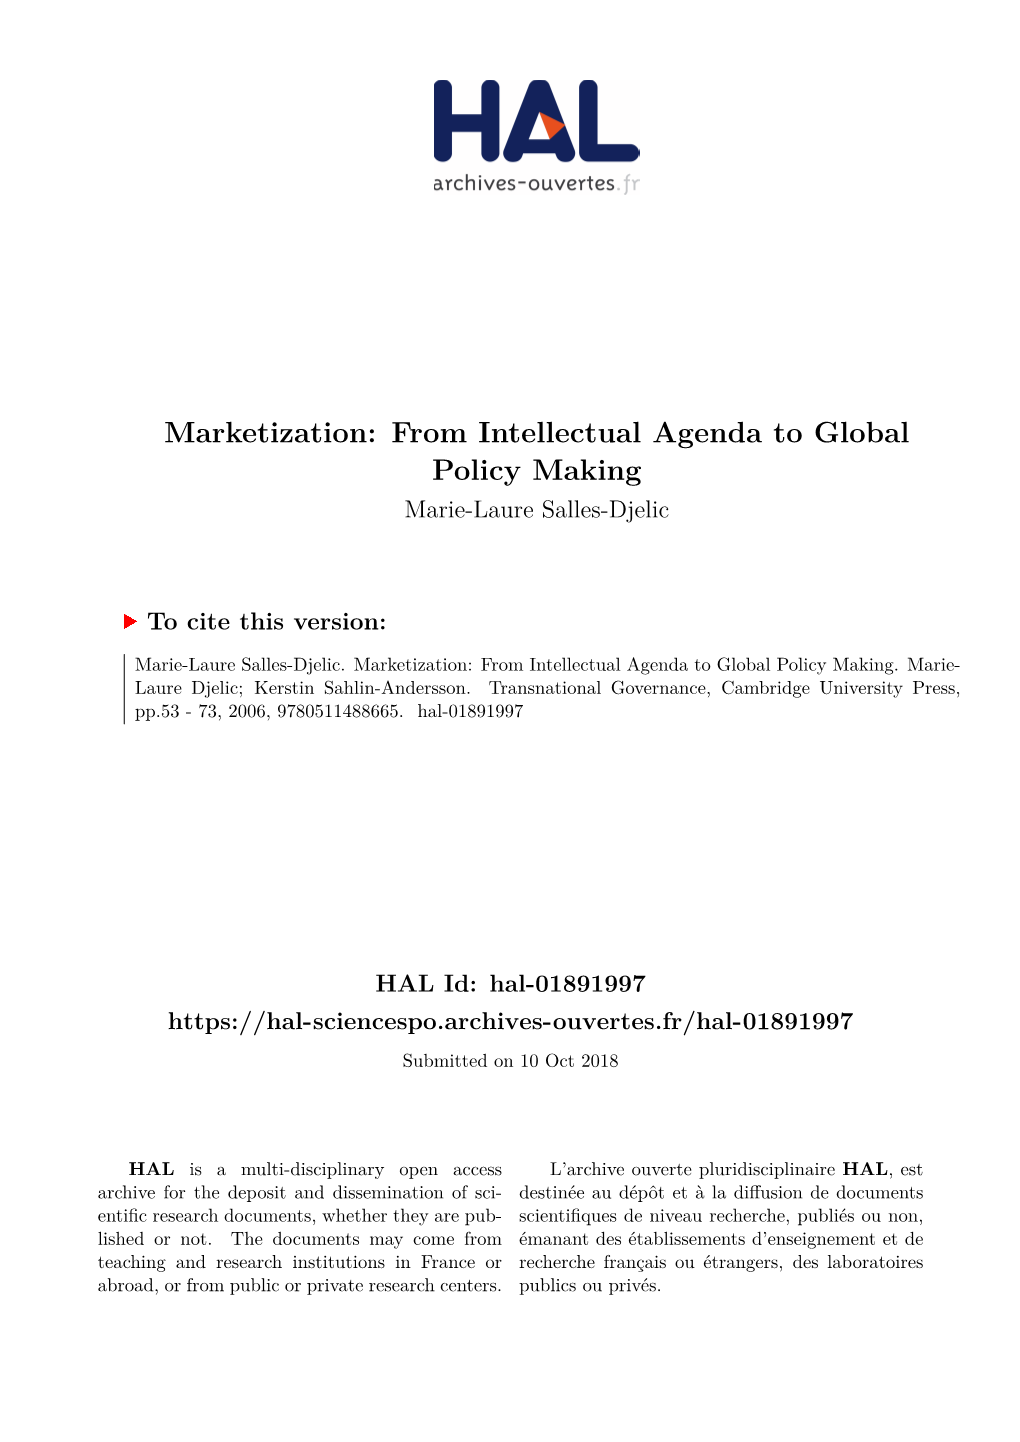 Marketization: from Intellectual Agenda to Global Policy Making Marie-Laure Salles-Djelic